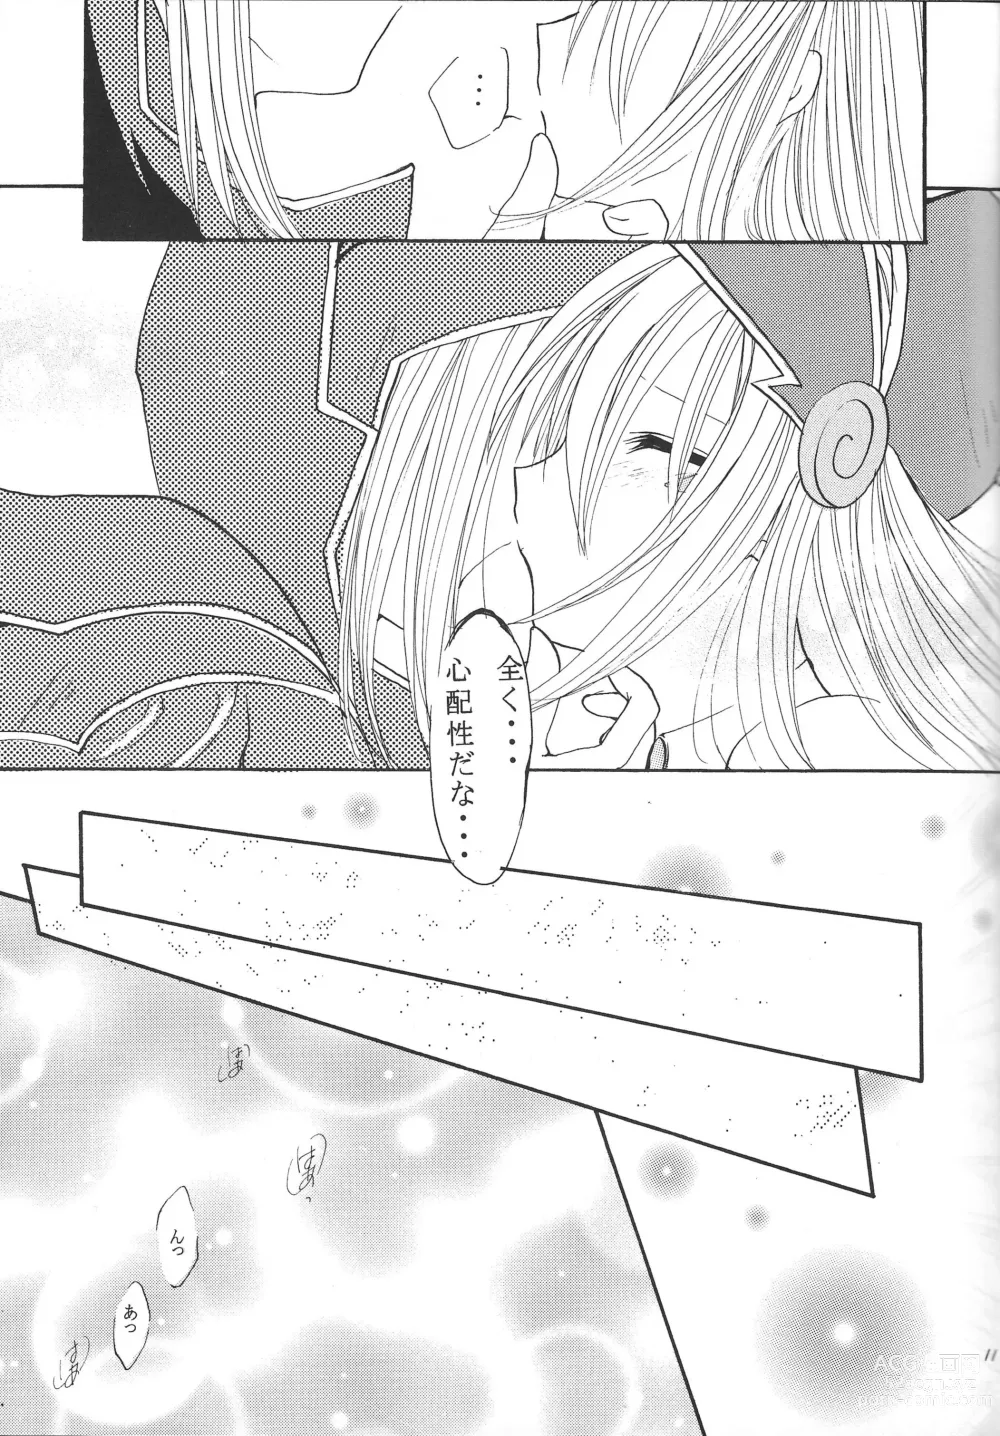 Page 10 of doujinshi pleasures of the moment